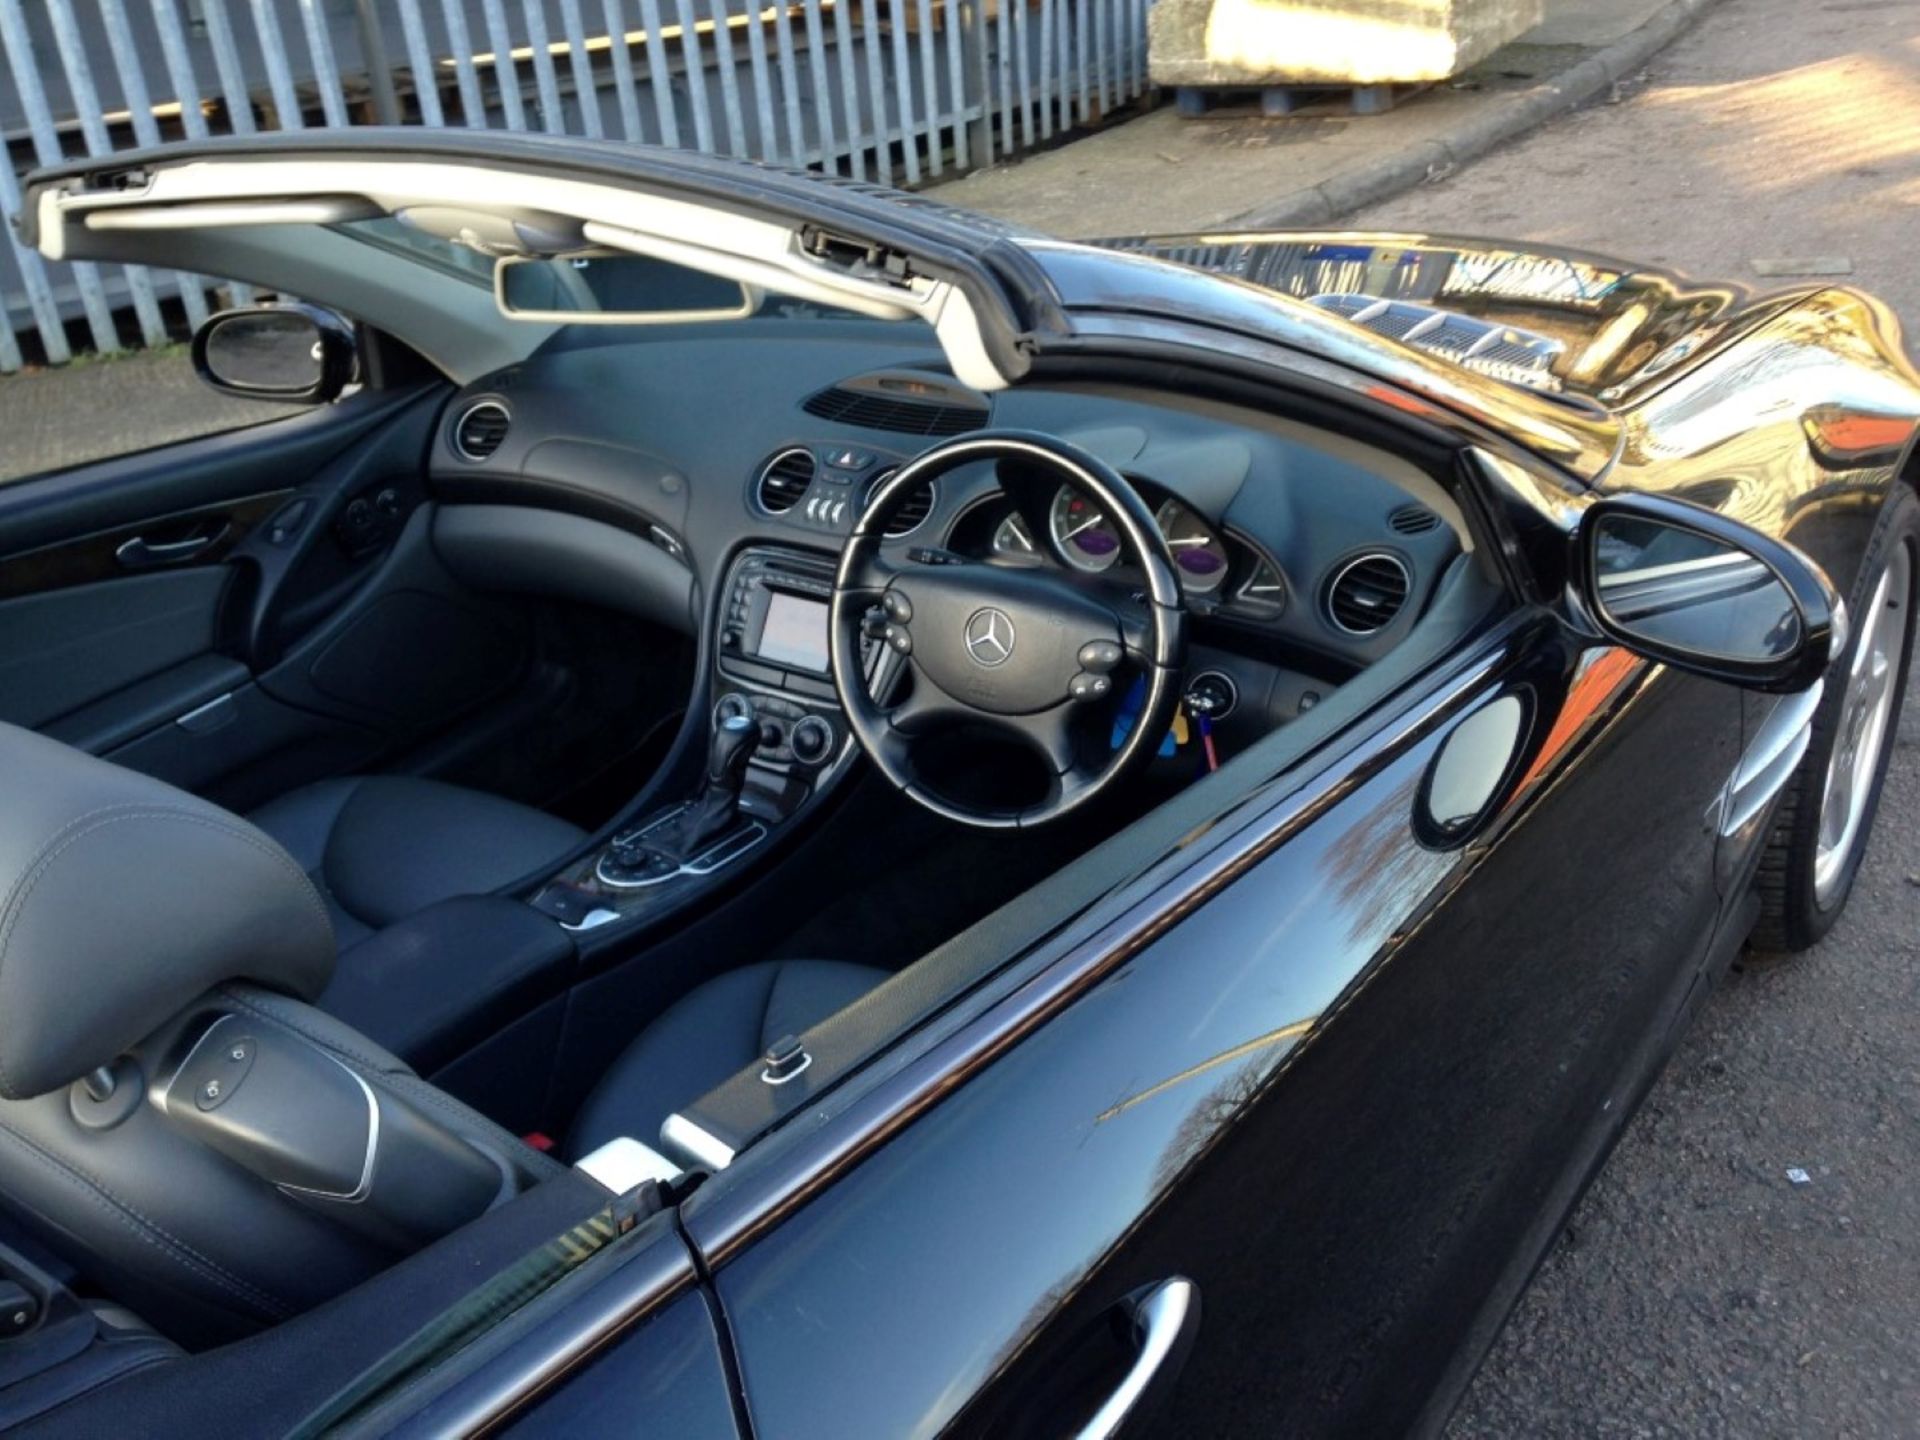 1 x Mercedes SL500 Automatic 5.0 Convertible - Petrol - Year 2002 - 94,500 Miles - Long MOT Expiry - Image 35 of 40